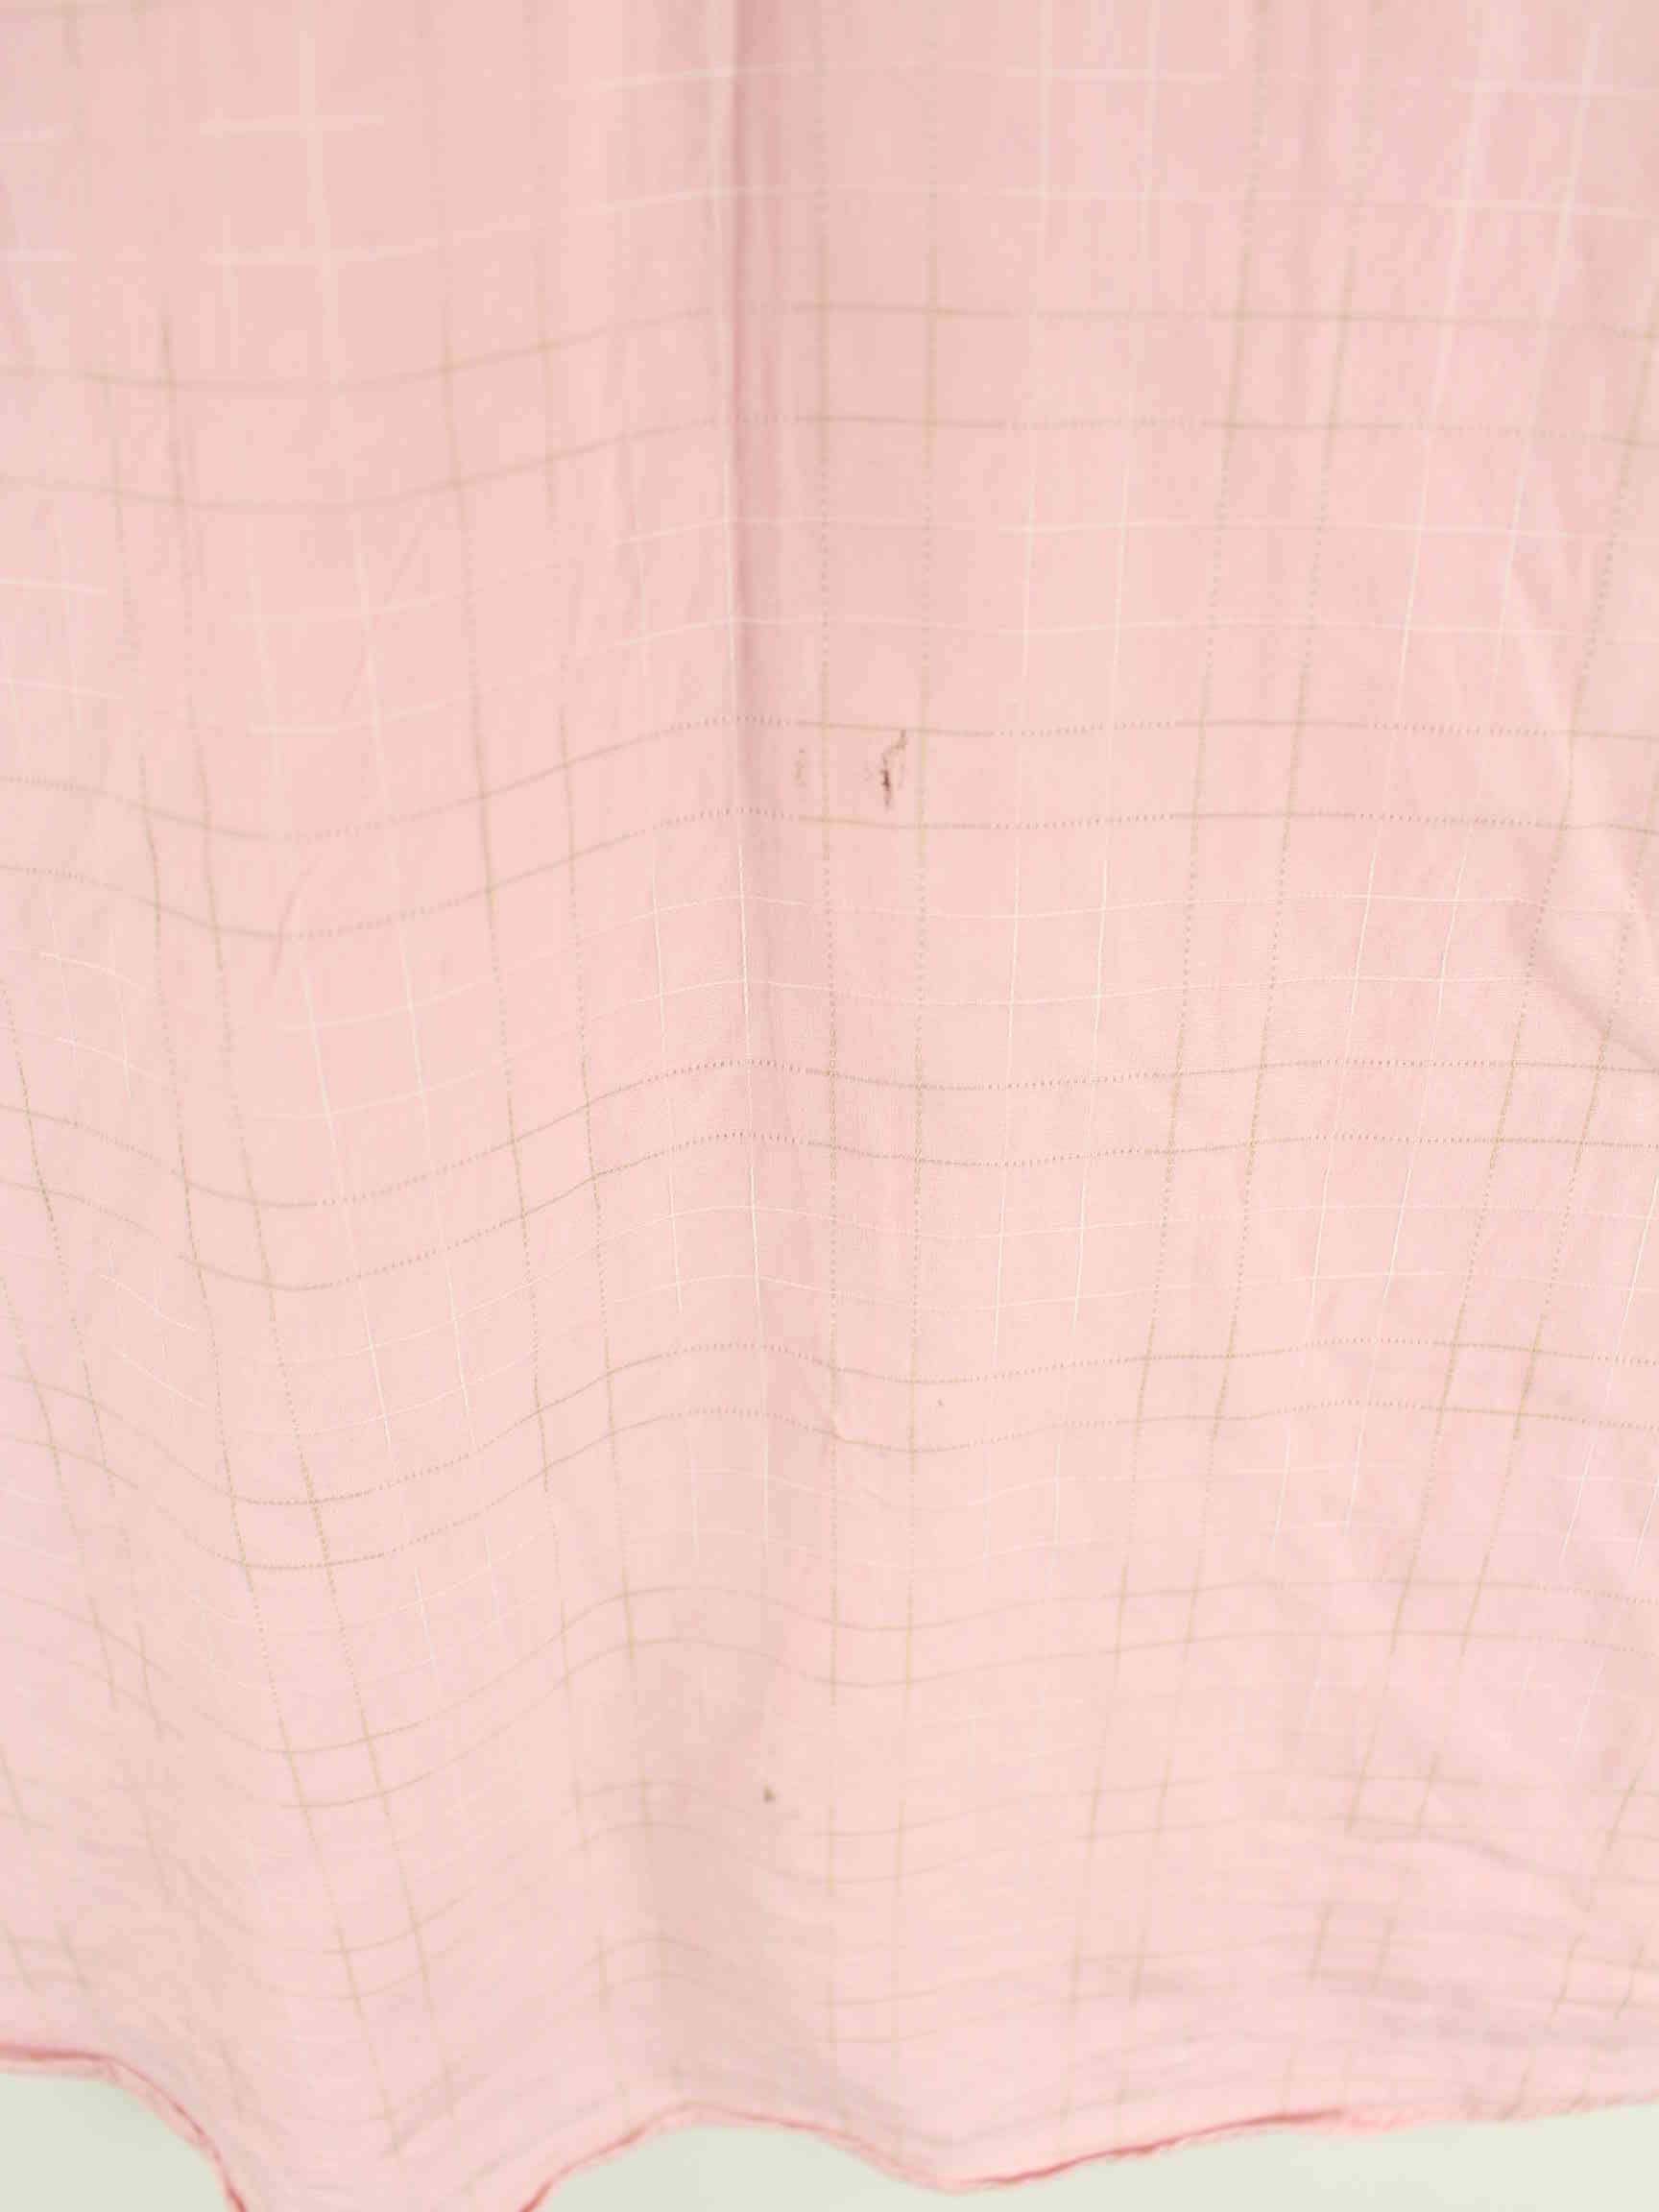 Lacoste Striped Hemd Pink XL (detail image 2)